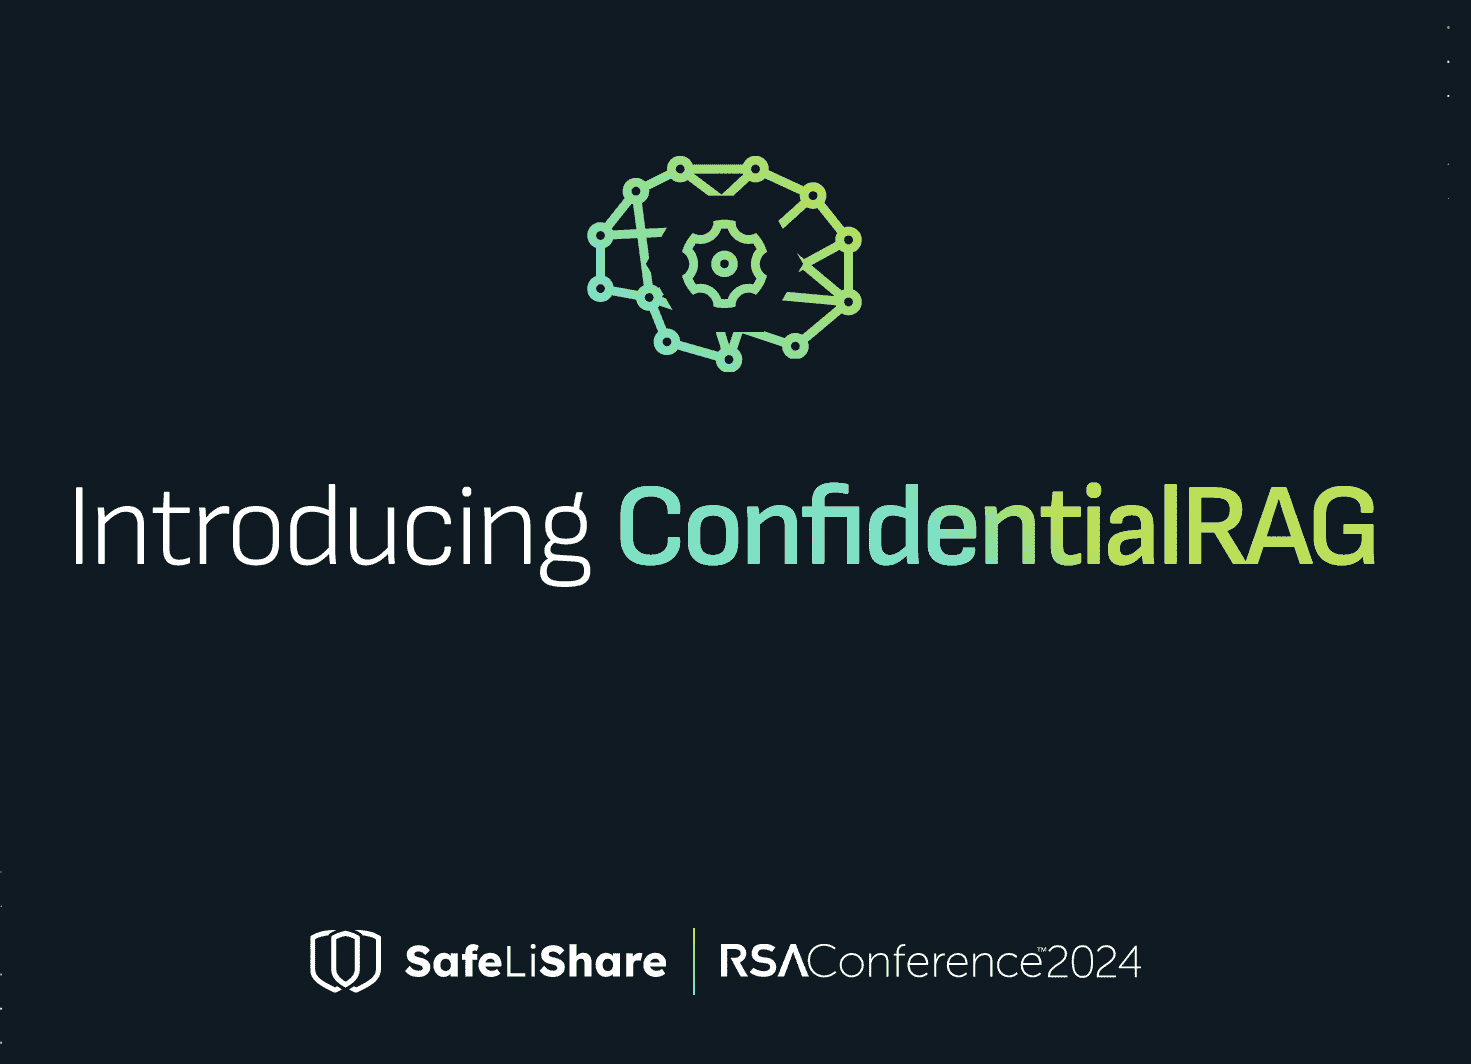 SafeLiShare Introduces ConfidentialRAG Private Beta at RSA Conference 2024, Offering Confidential Azure OpenAI Service for LLM Applications